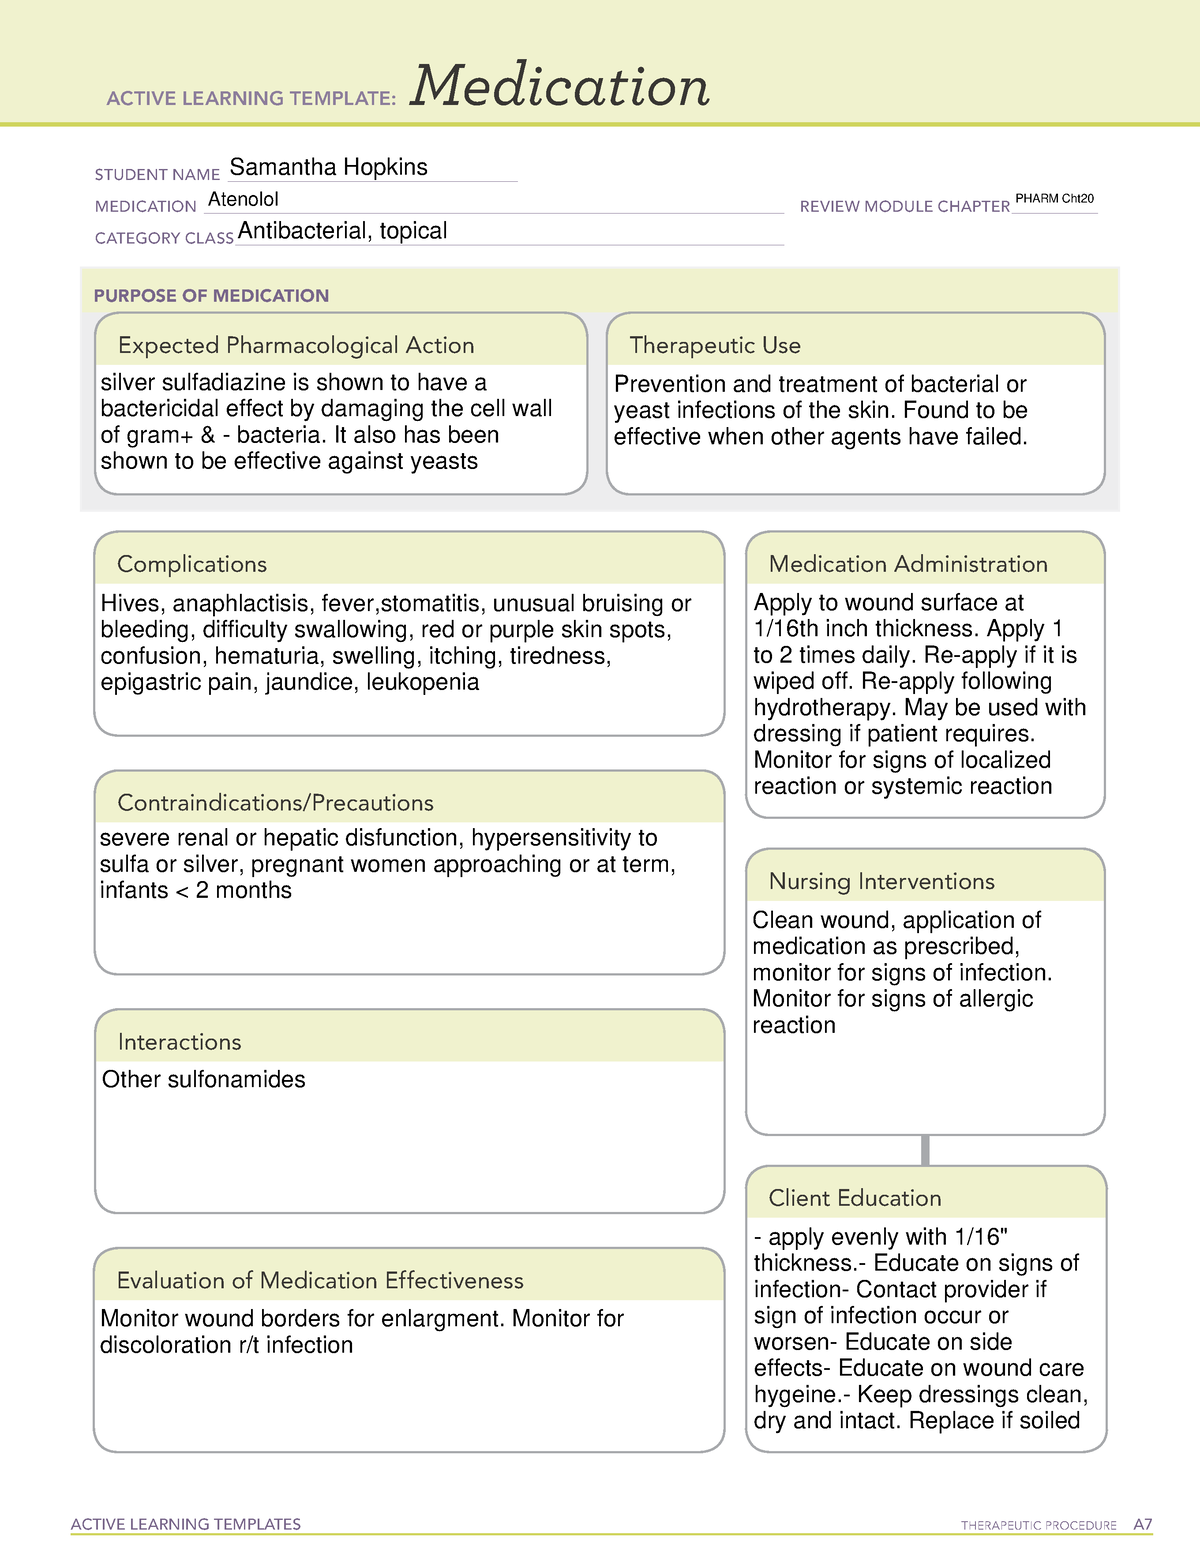 ati-templates-medication-and-diagnostic-active-learning-templates